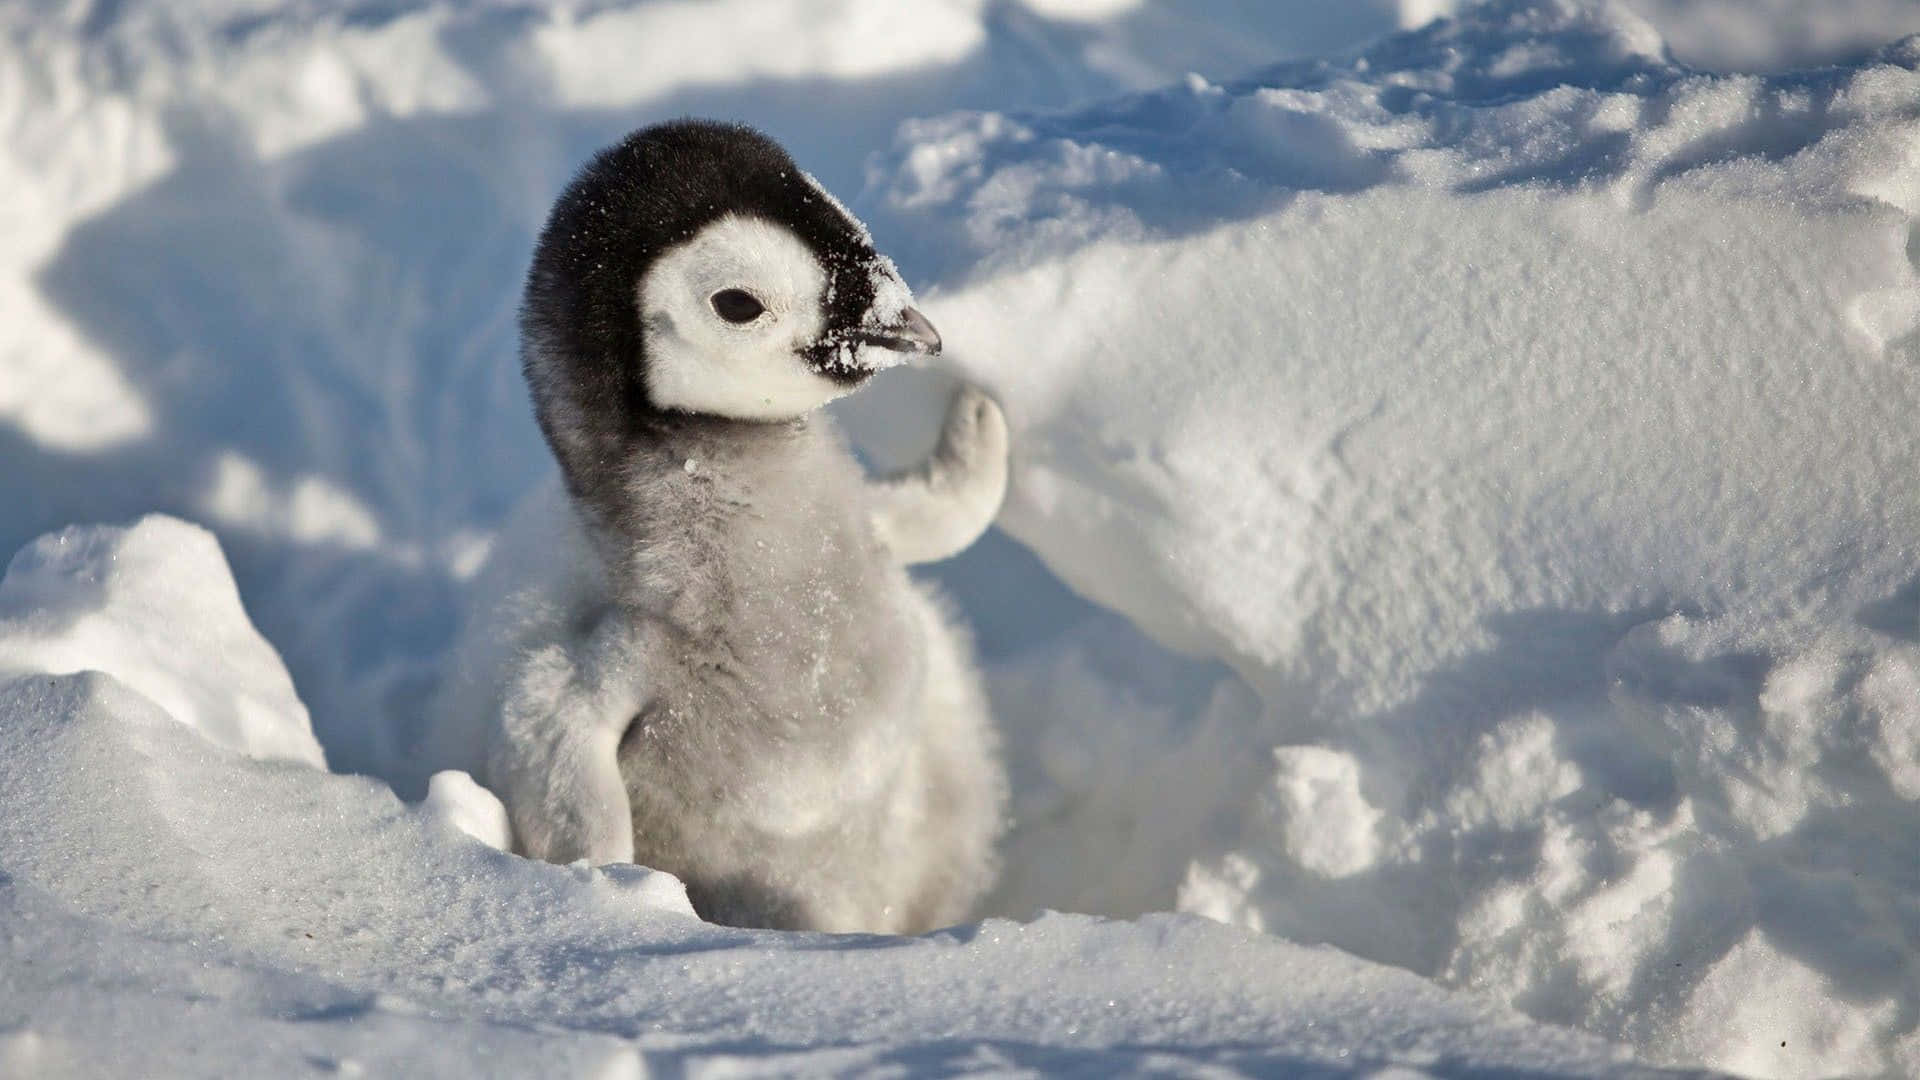 "A sweet Baby Penguin"